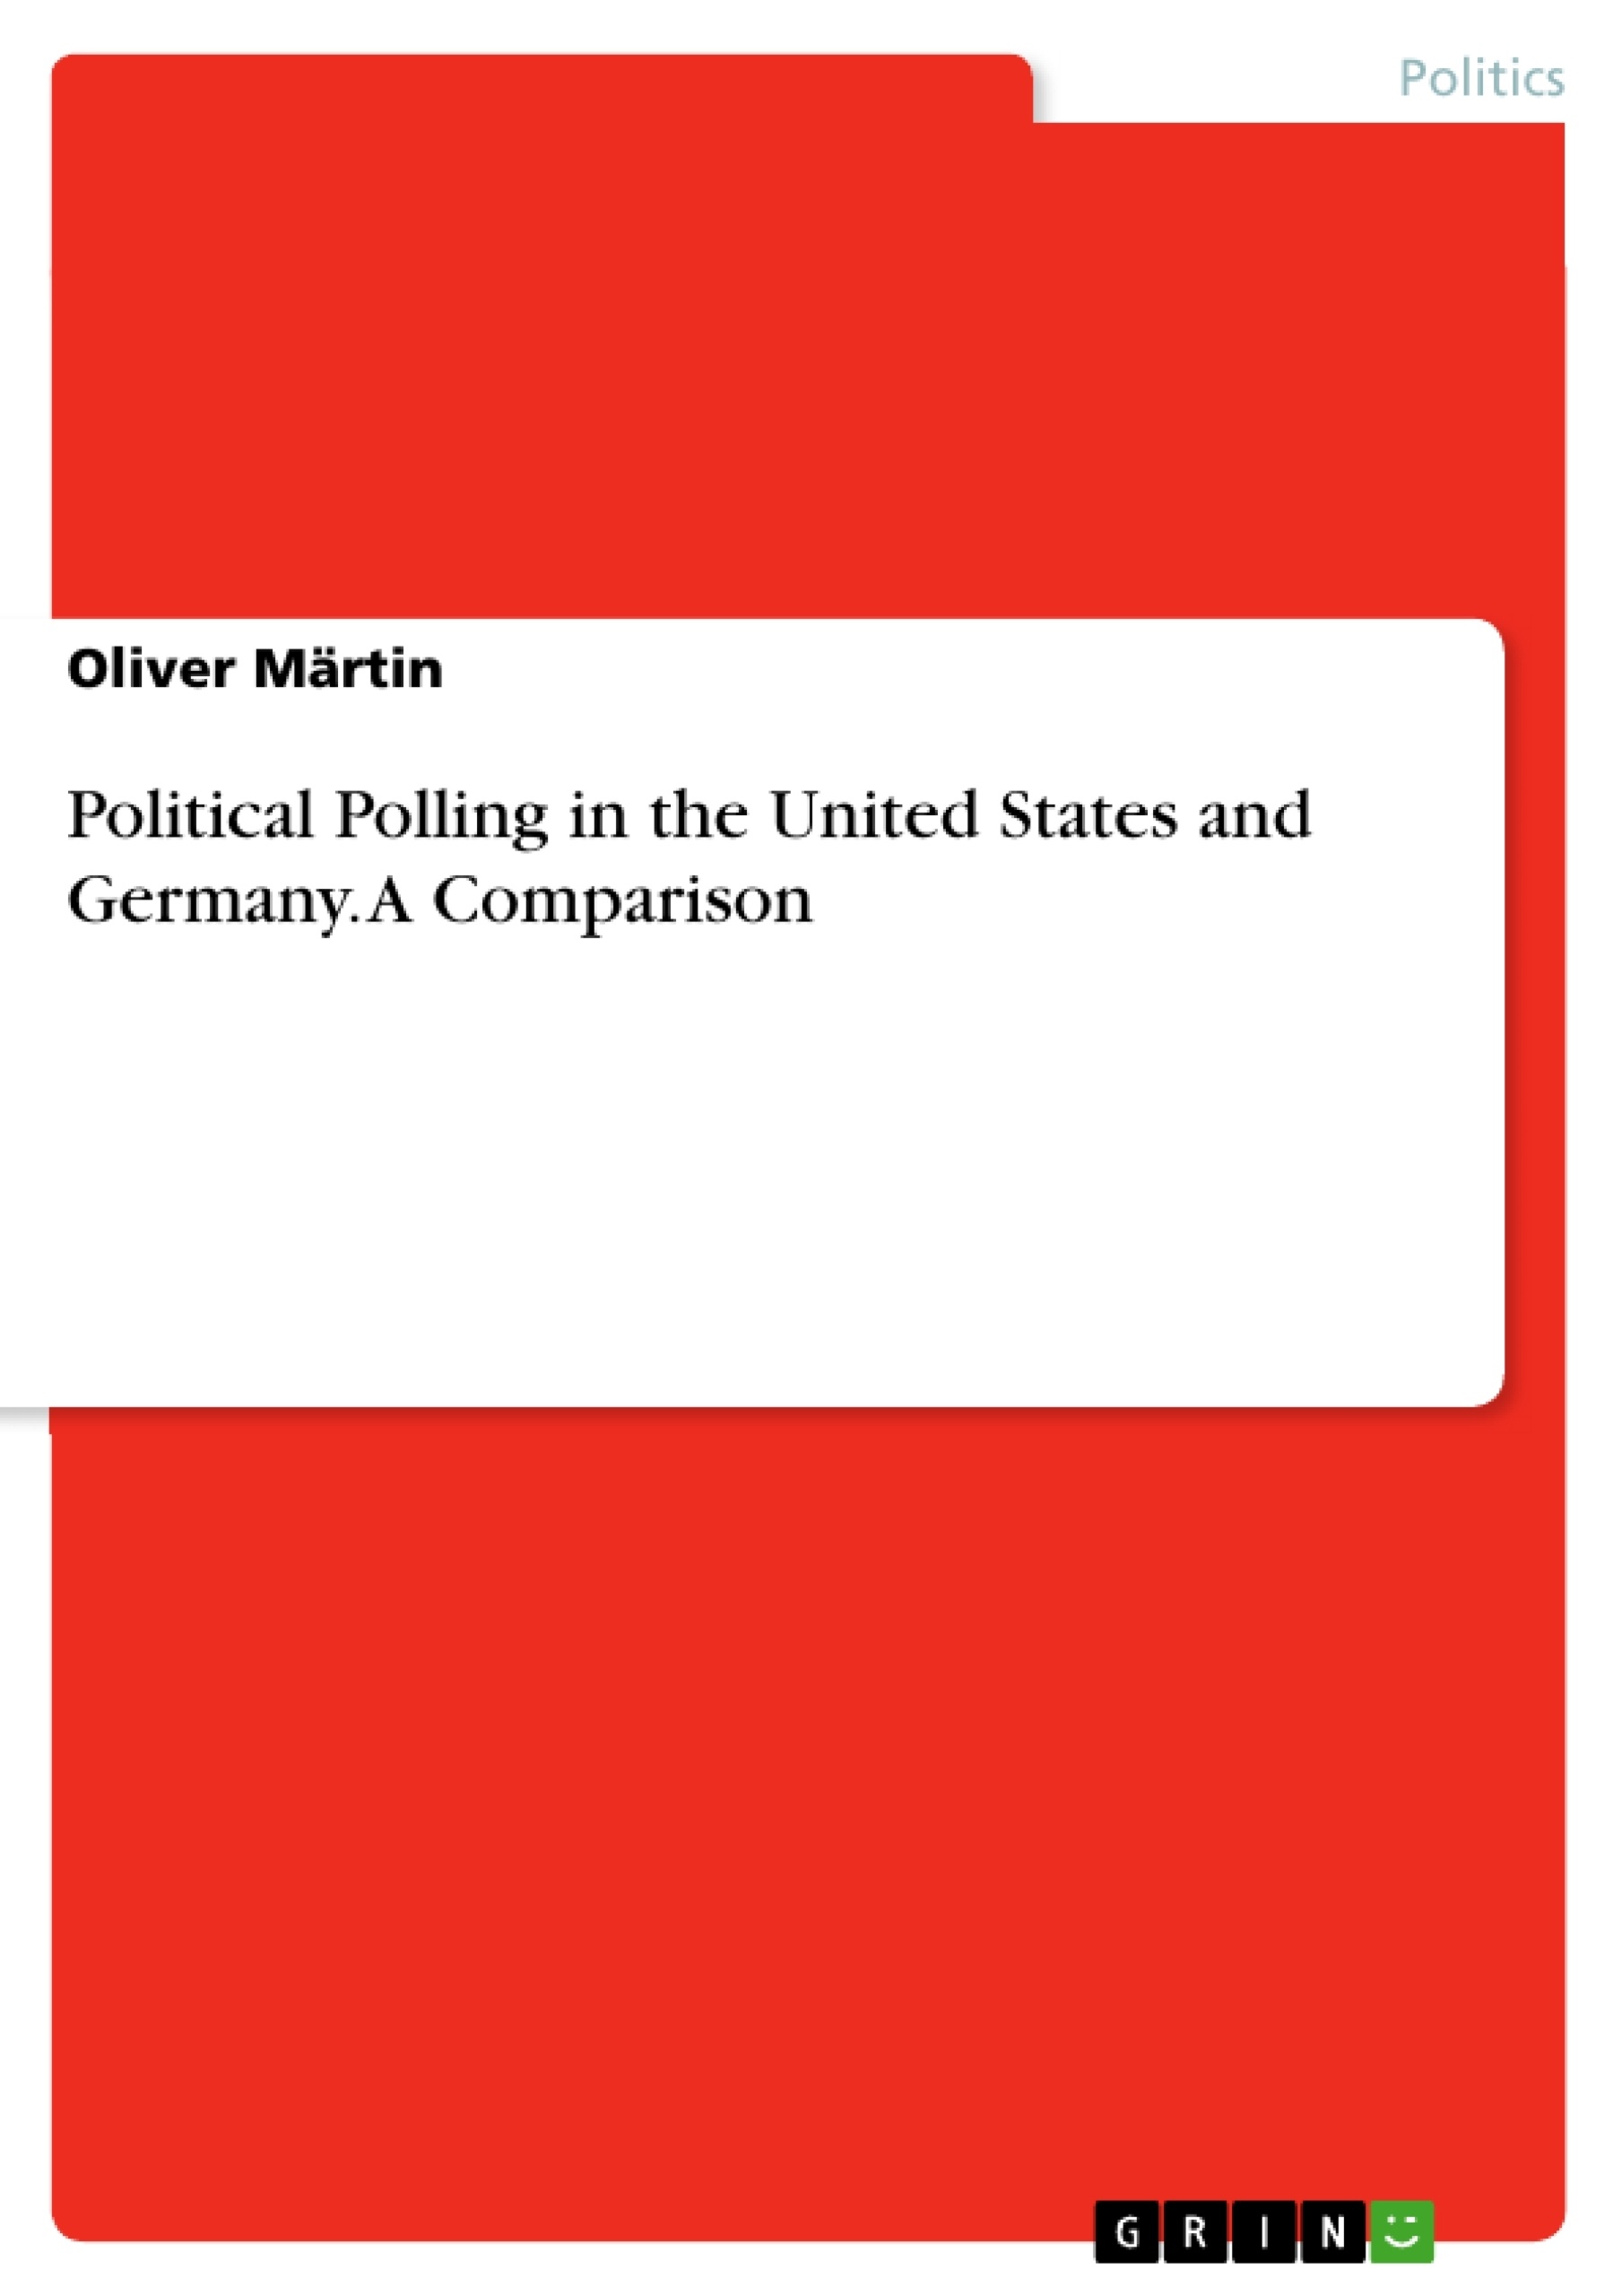 Título: Political Polling in the United States and Germany. A Comparison